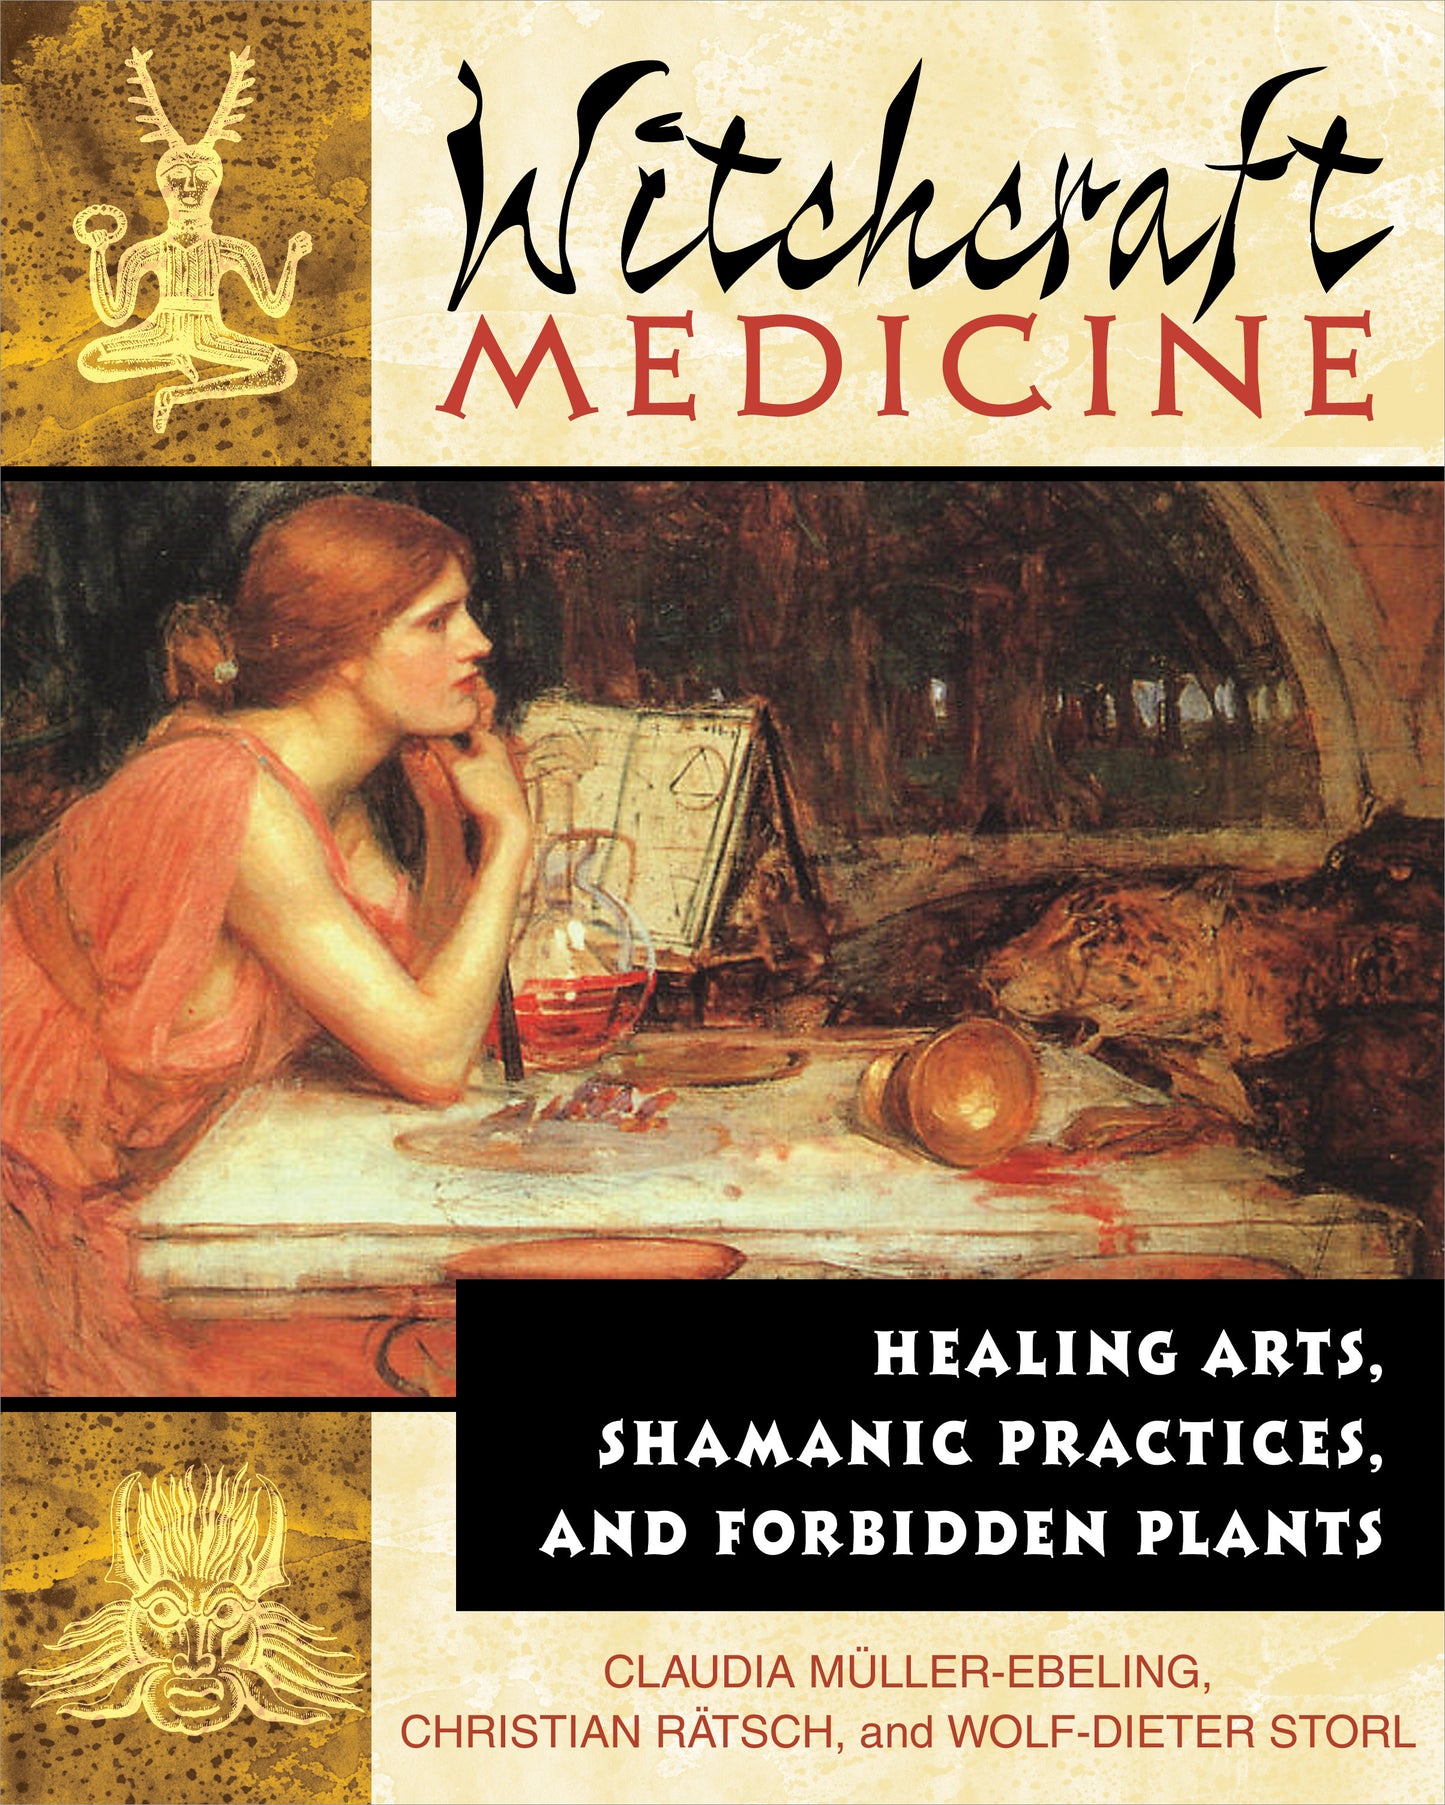 Witchcraft Medicine by Claudia Müller-Ebeling, Christian Rätsch, and Wolf-Dieter Storl, Ph.D.